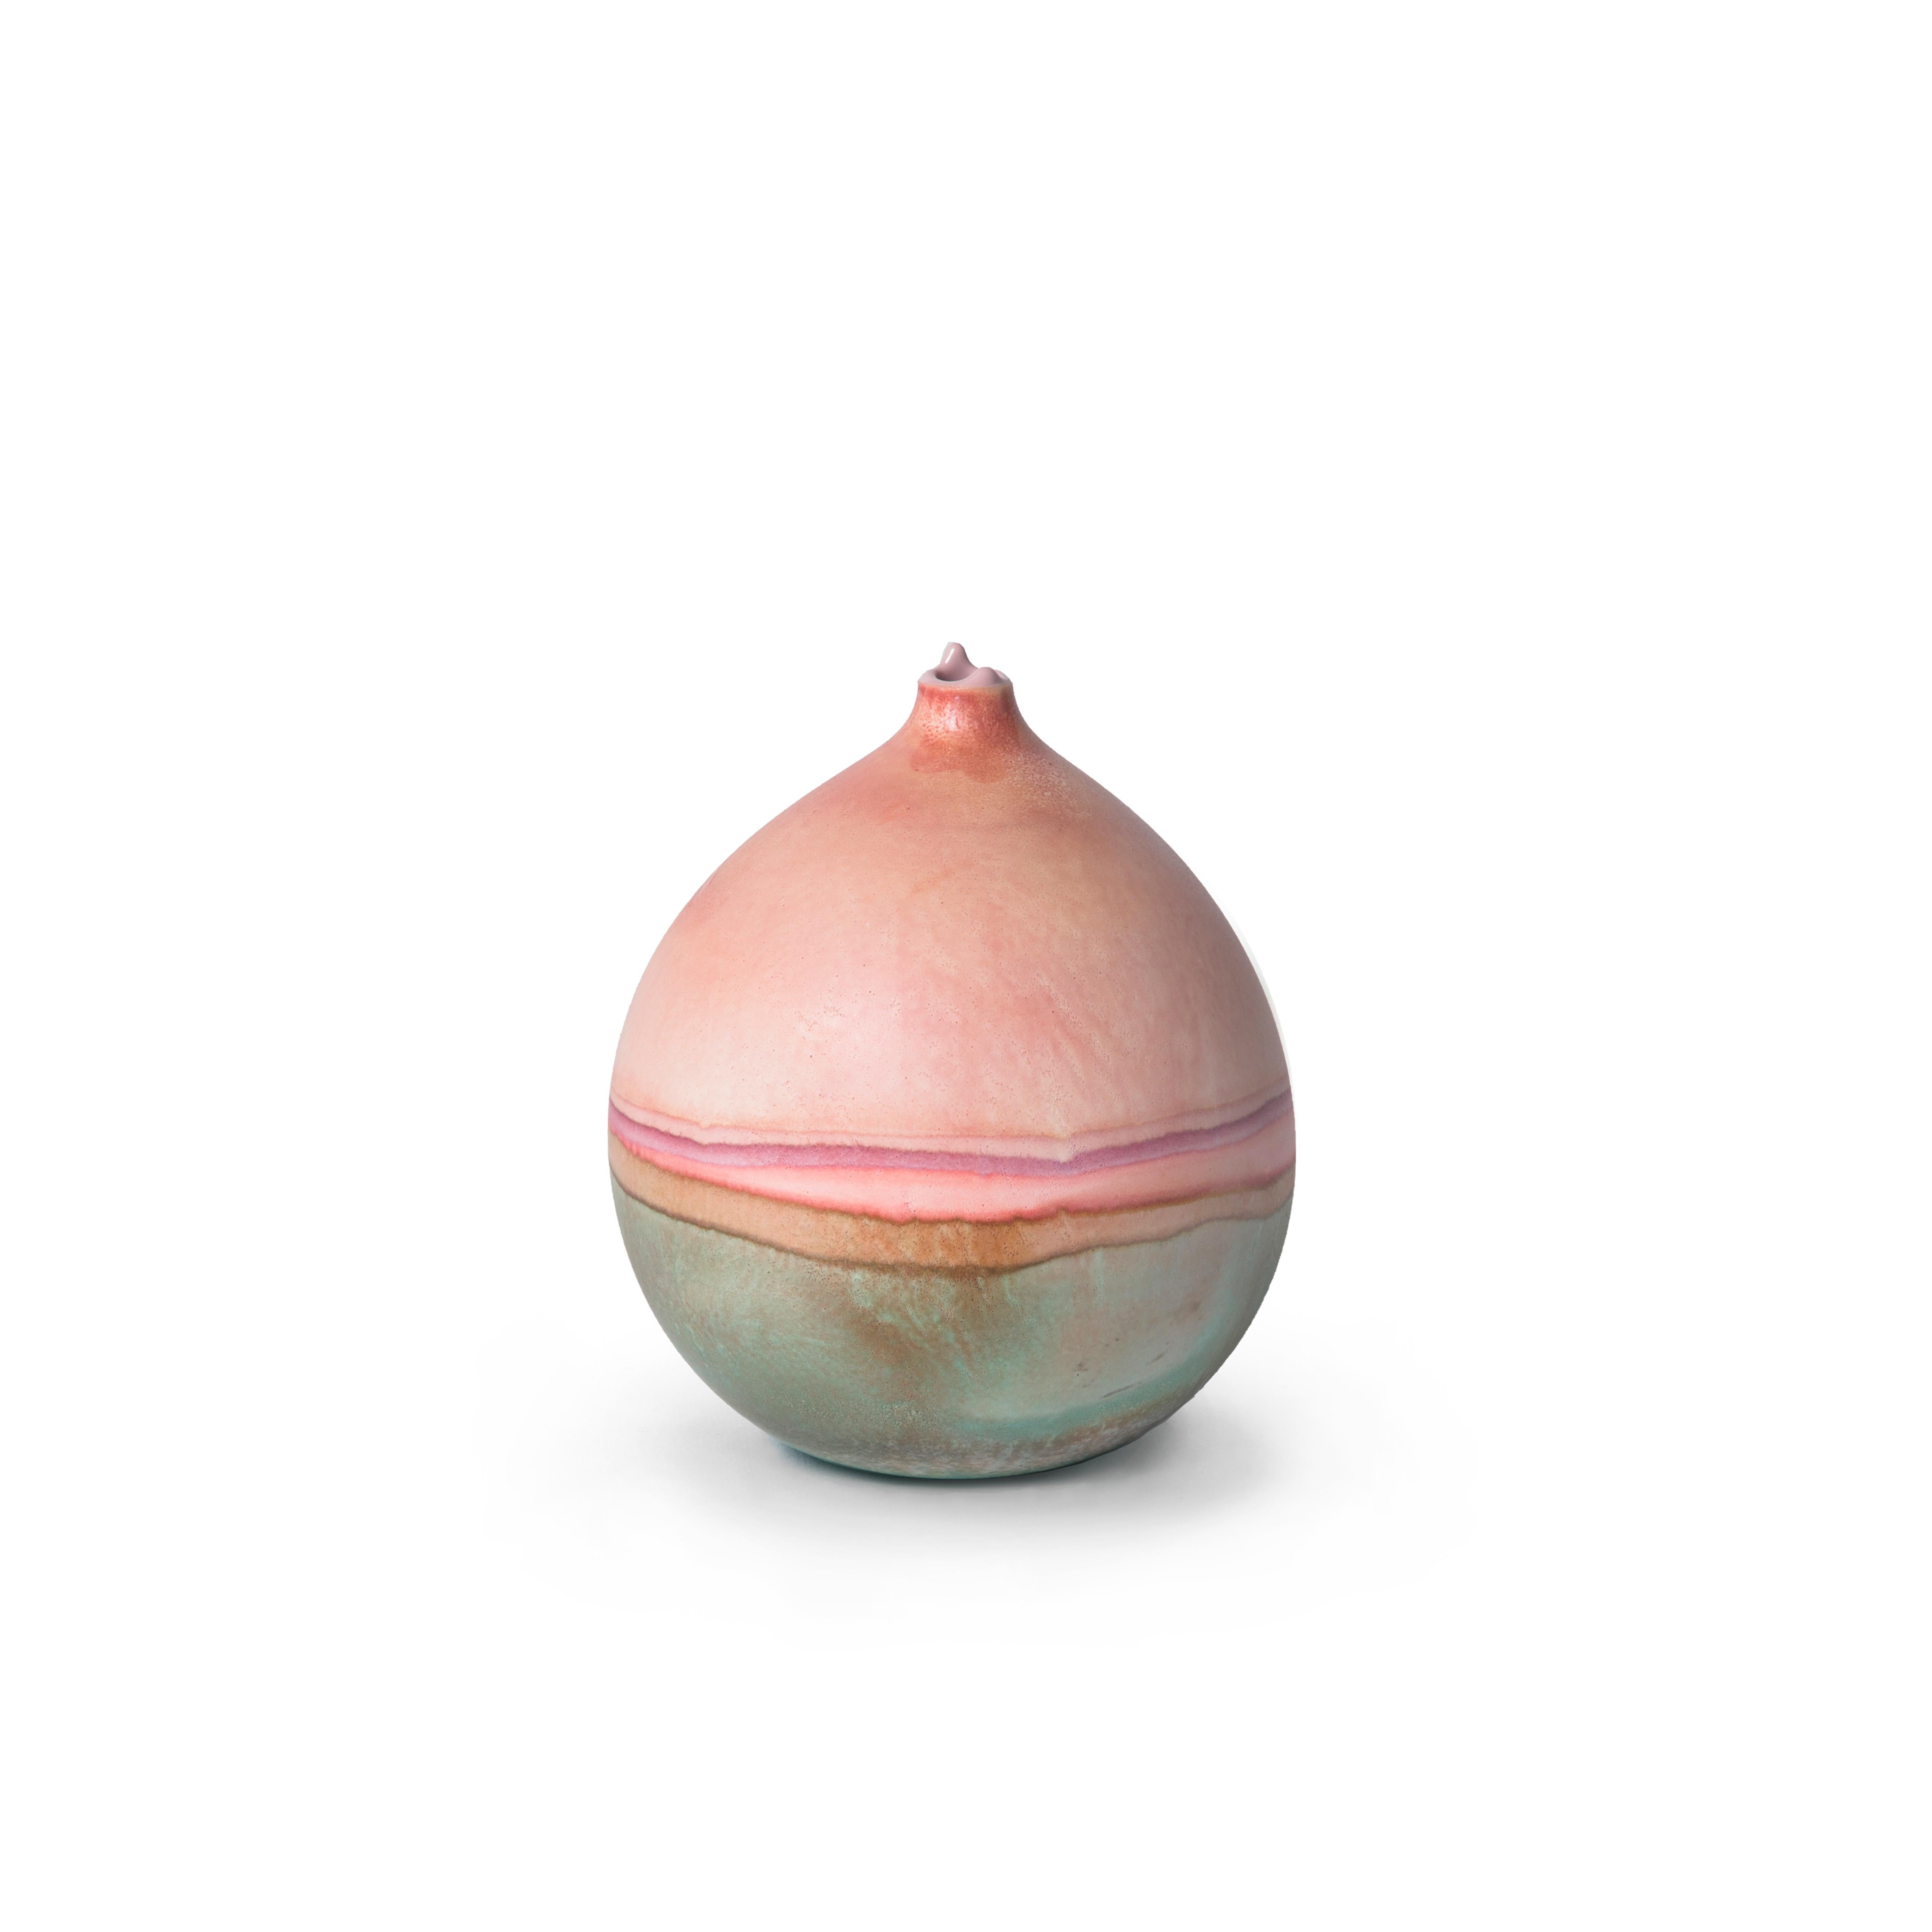 Coral patina pluto vase by Elyse Graham
Dimensions: W 13 x D 13 x H 14 cm
Materials: plaster, resin
Molded, dyed, and finished by hand in LA. Customization
Available.
All pieces are made to order

This collection of vessels is inspired by